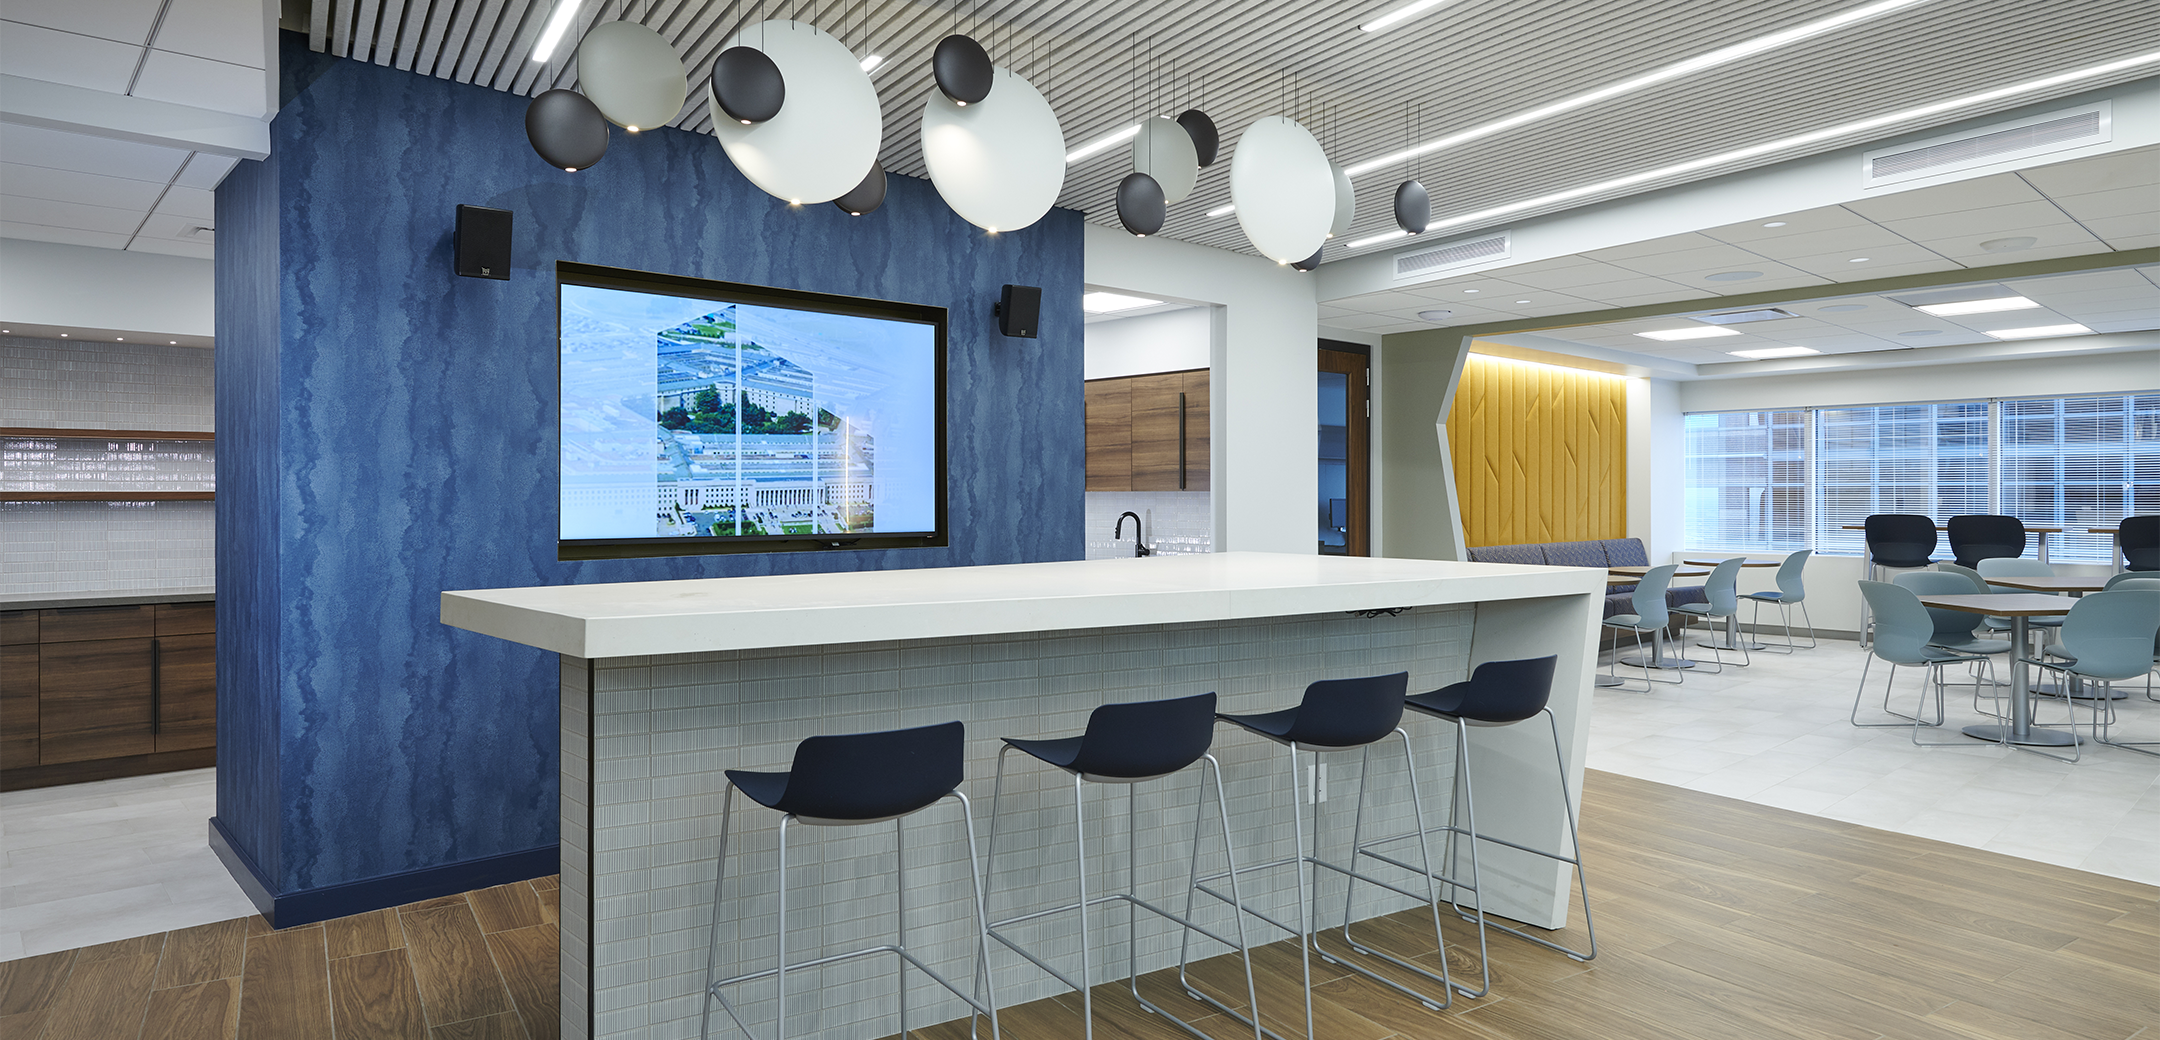 An angled interior view of the Cohen Seglias rest space, showcasing the wooden flooring, blue accent pillar, yellow accent a wall and a centerpiece bar.